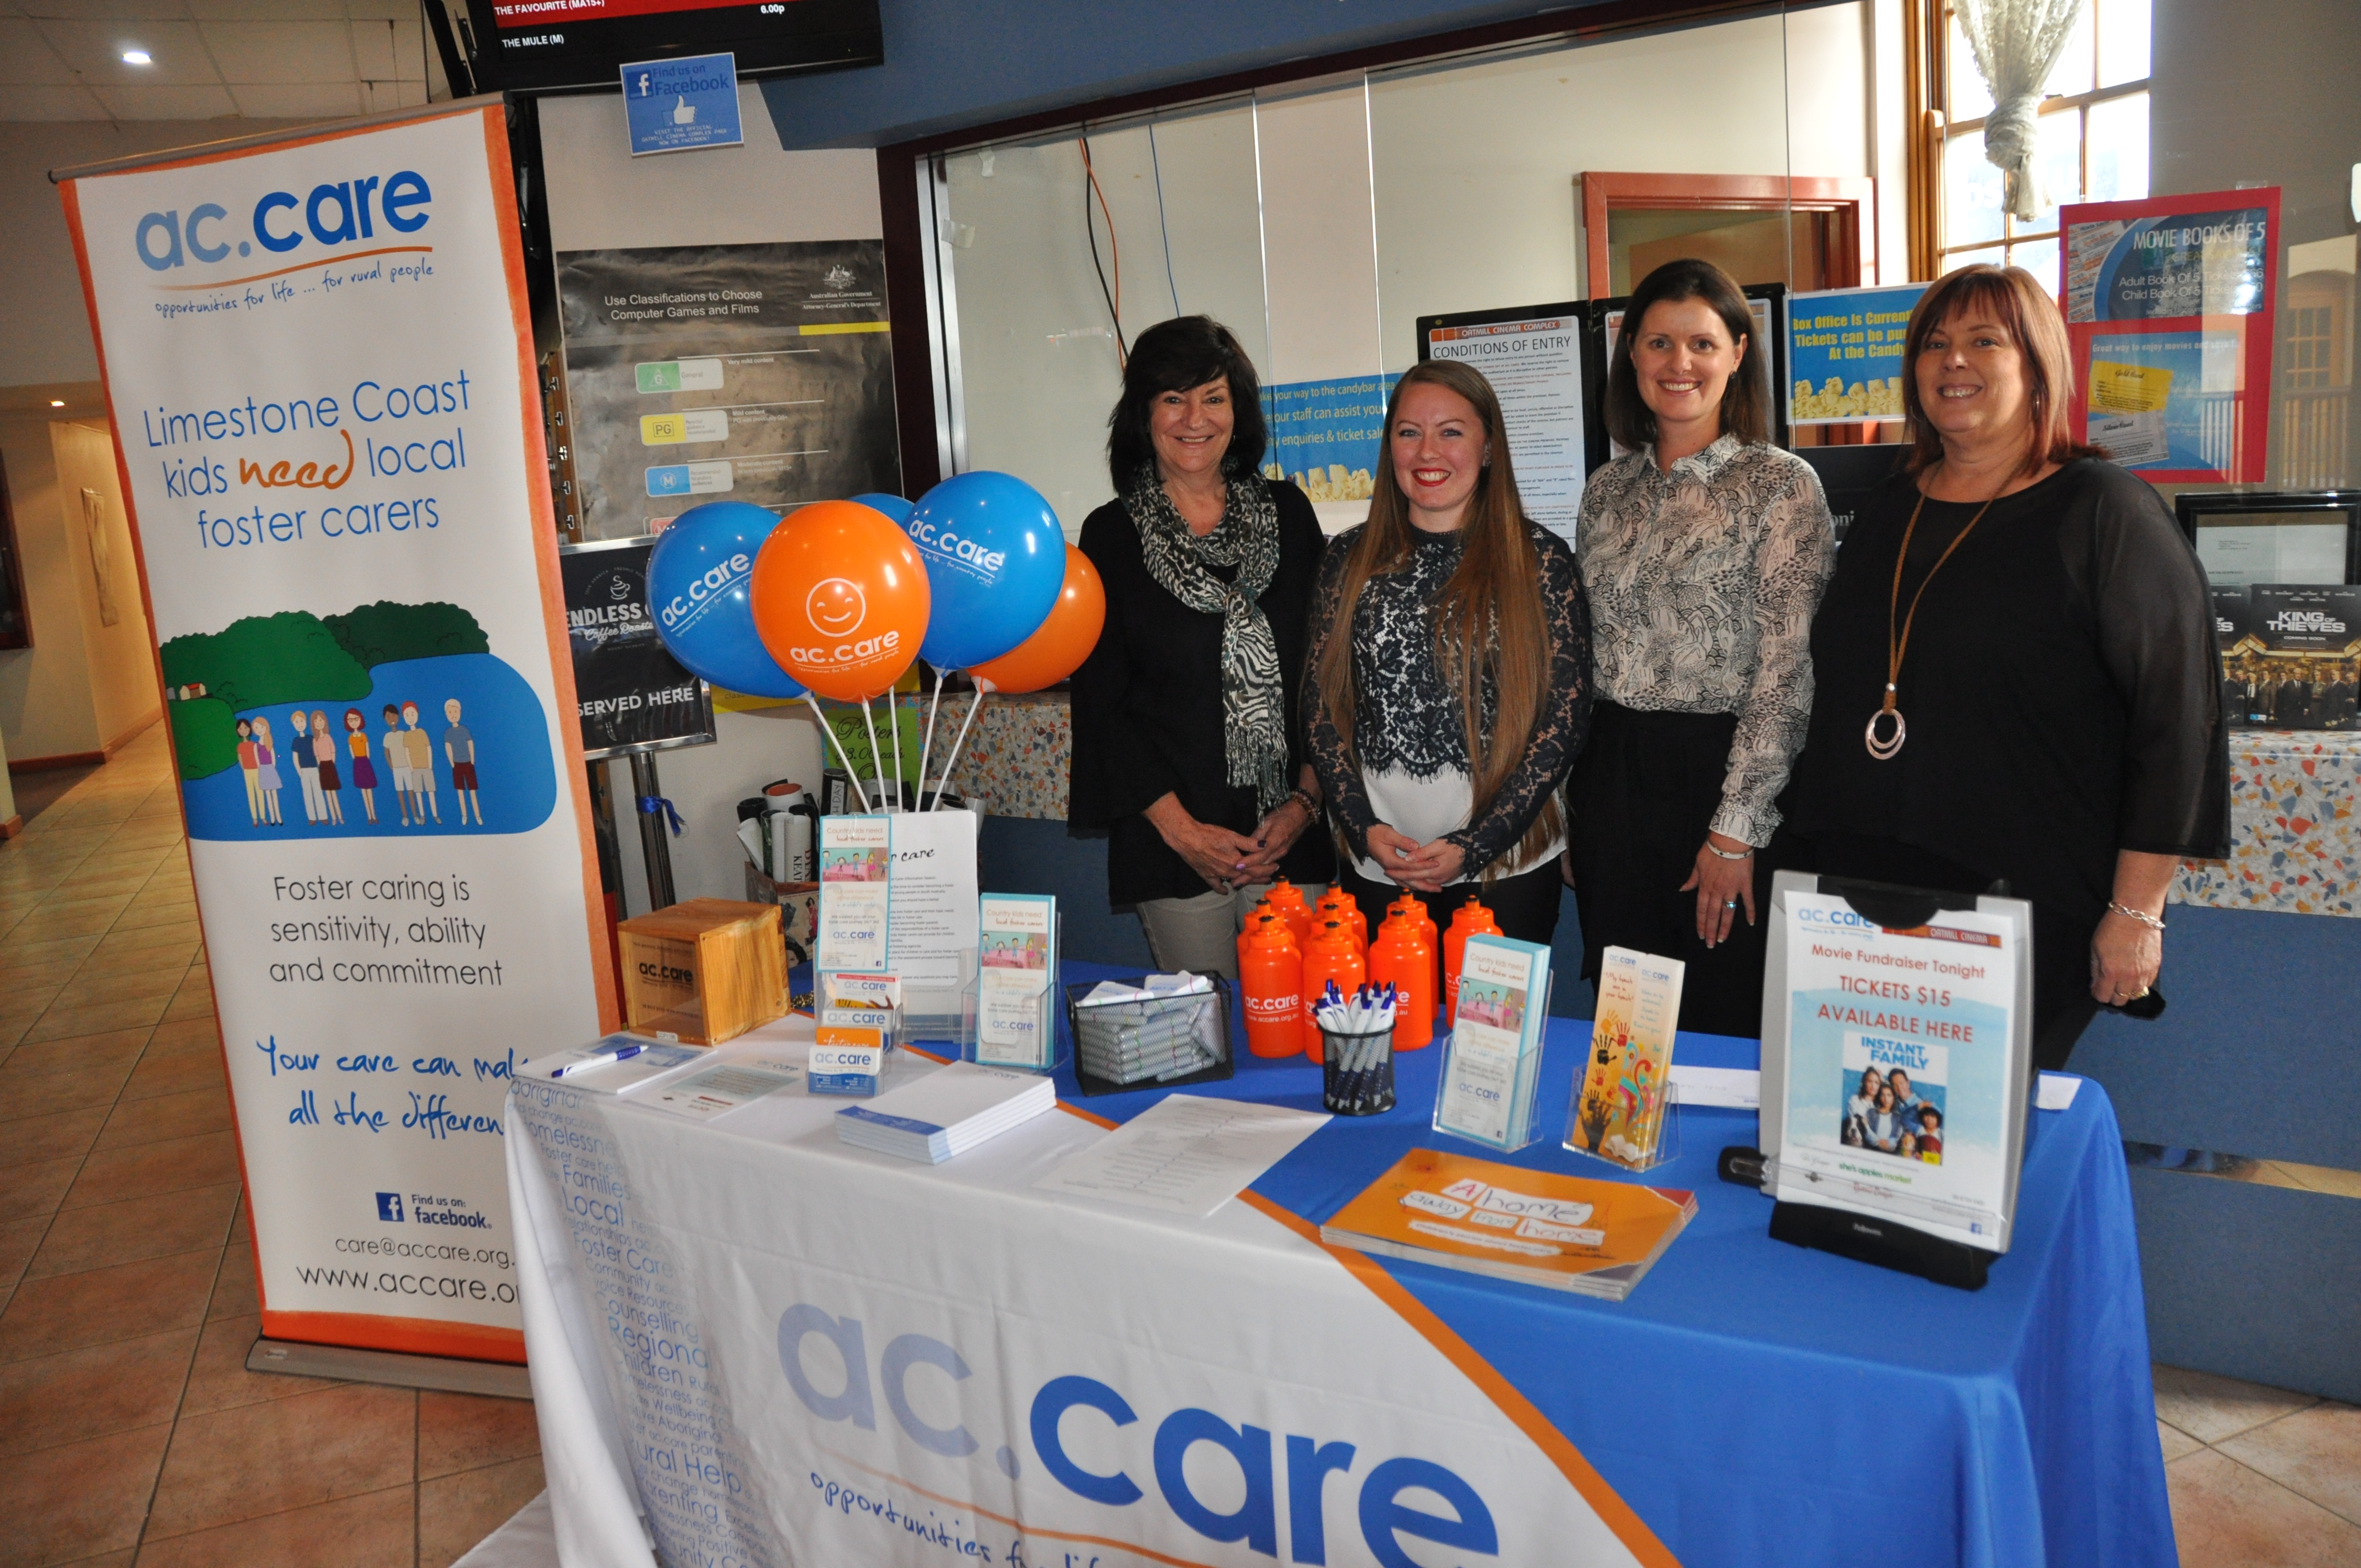 ac.care staff Lisa Fry, Dani Atkinson, Leticia Gosse and Cindy Climas with the foster care information stand at the Oatmill Cinema